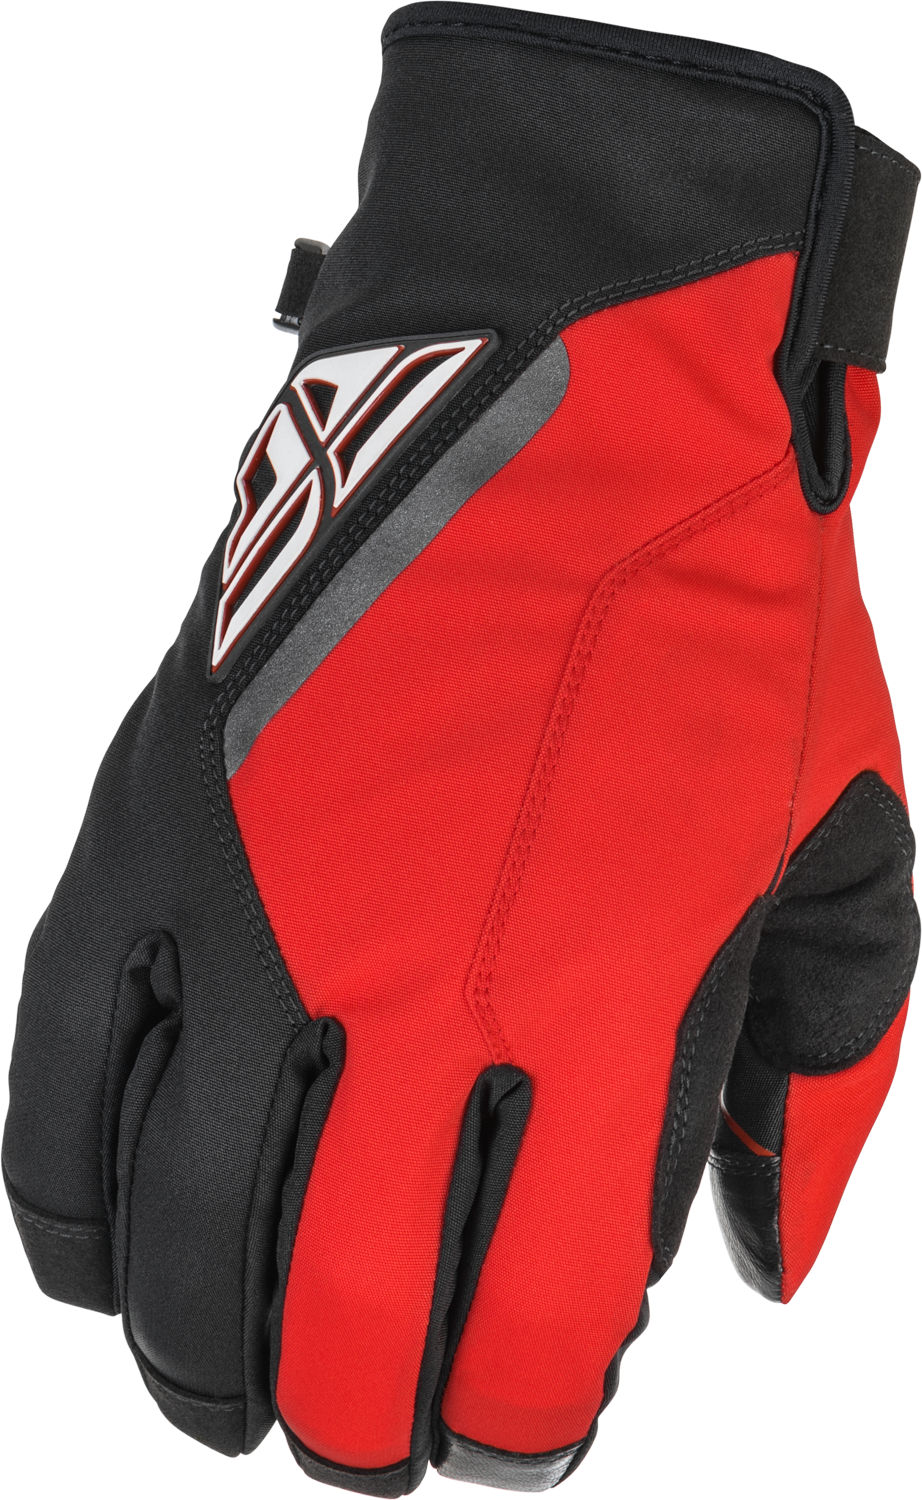 FLY RACING Youth Title Gloves Black/Red Sz 06 371-05306